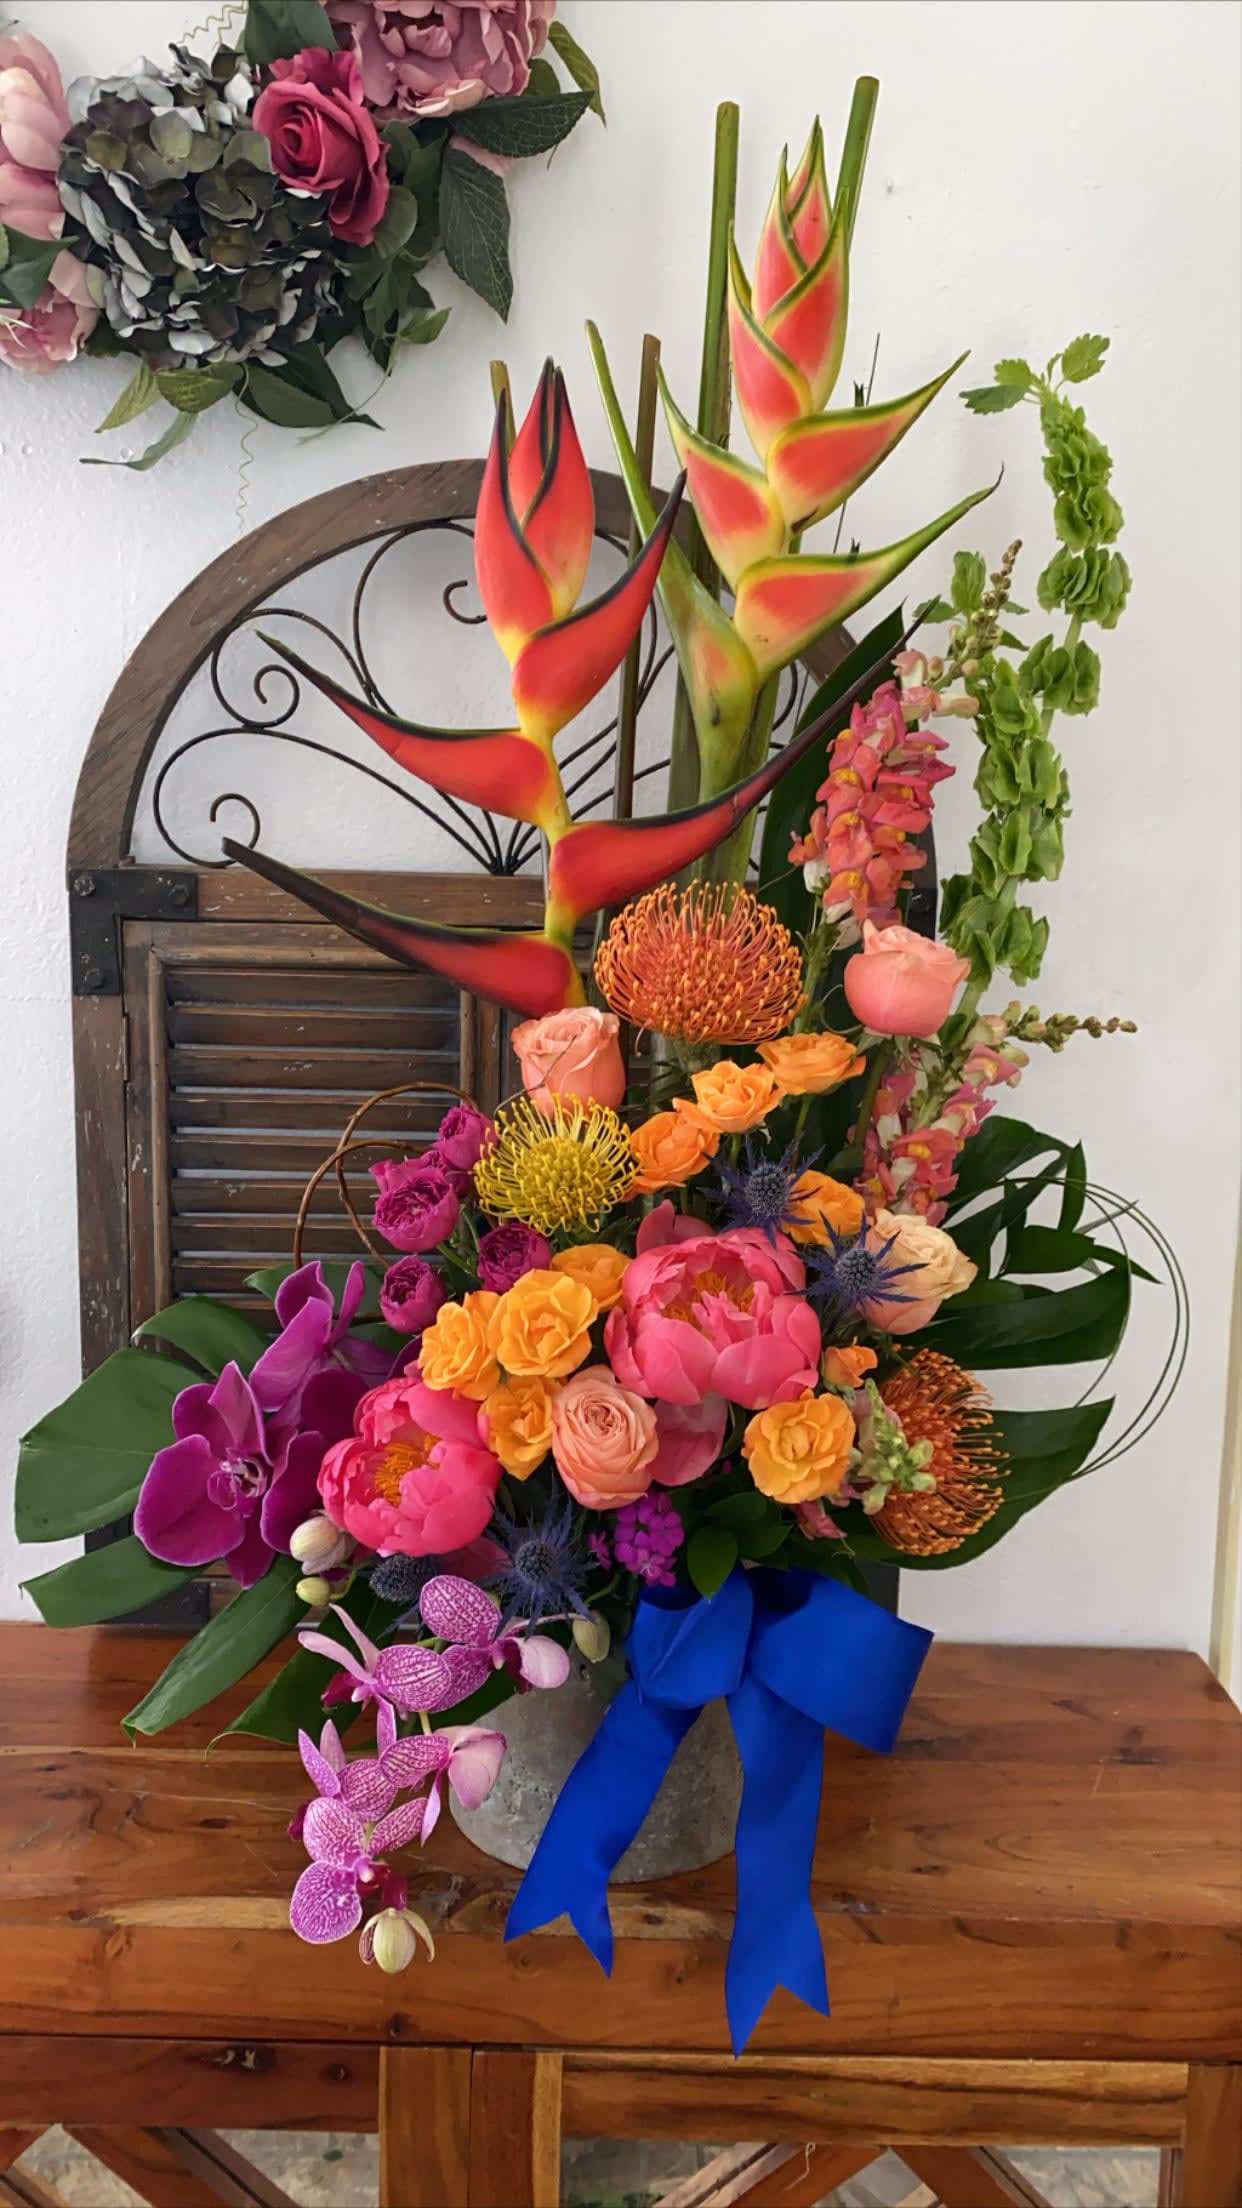 Cascade of love - Wonderful tropical bouquet in cascade shape, have the most beautiful demonstration of love.